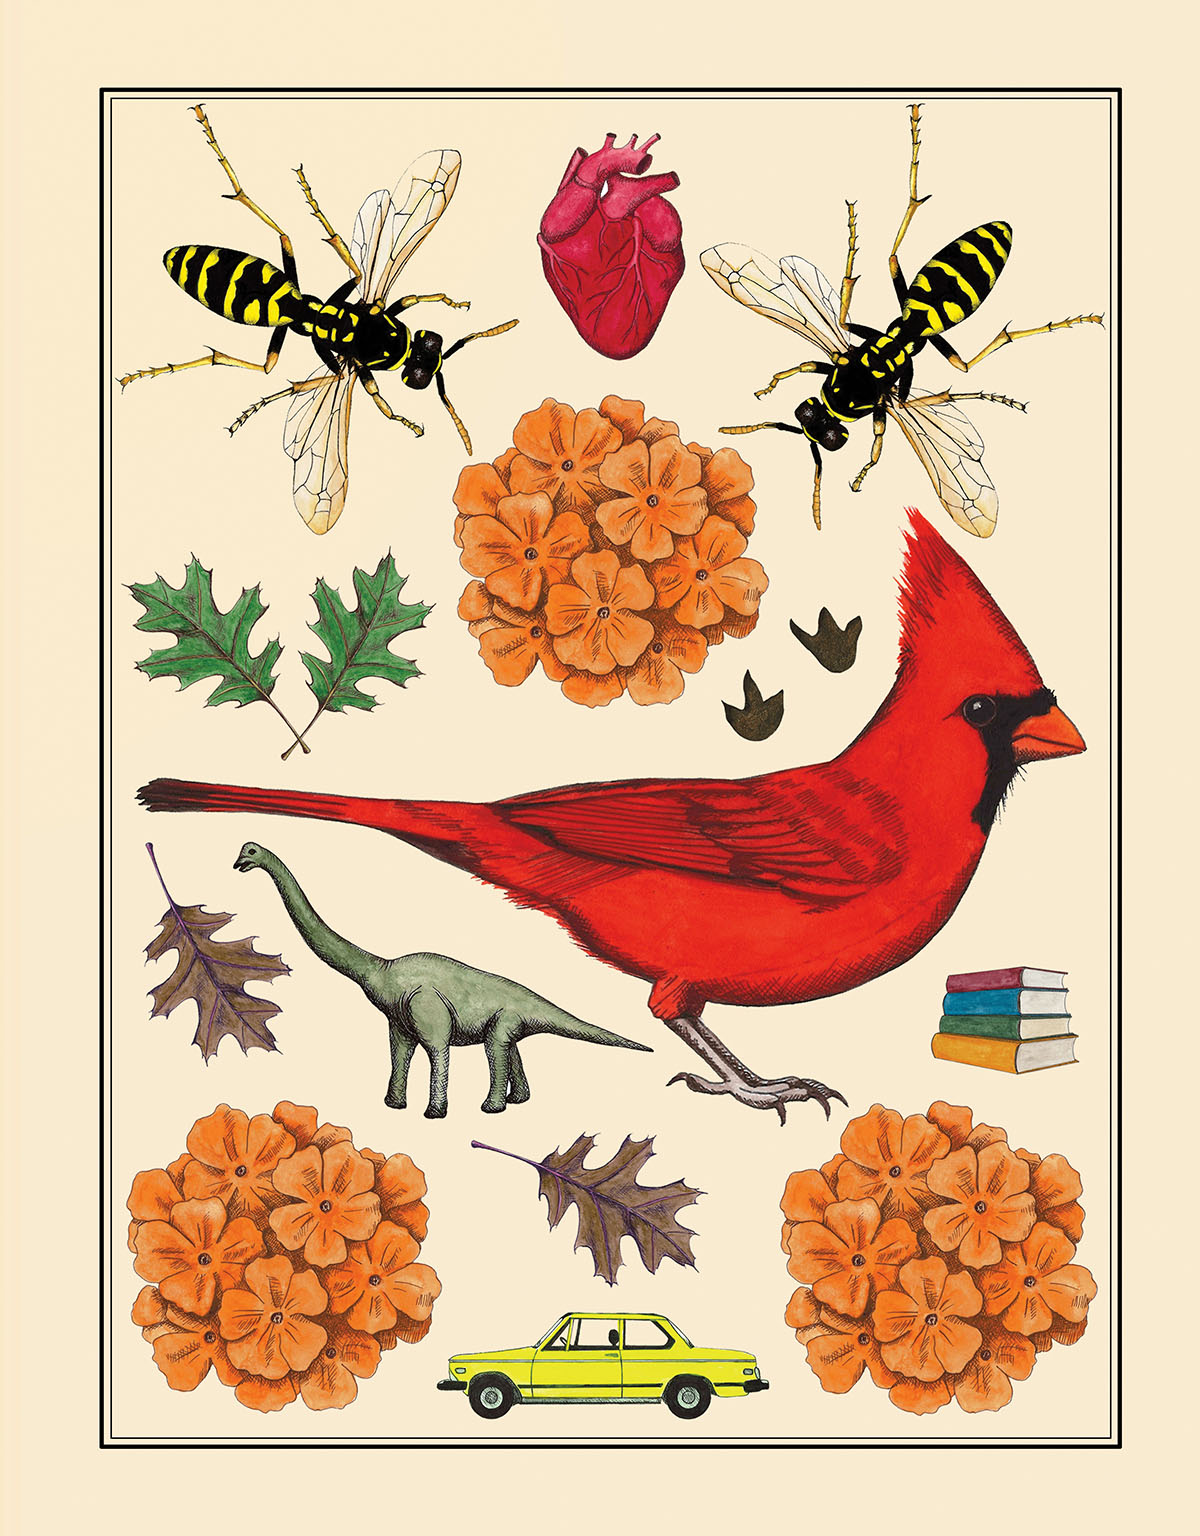 An illustration showing various animals like a cardinal, bees, flowers, and a dinosaur